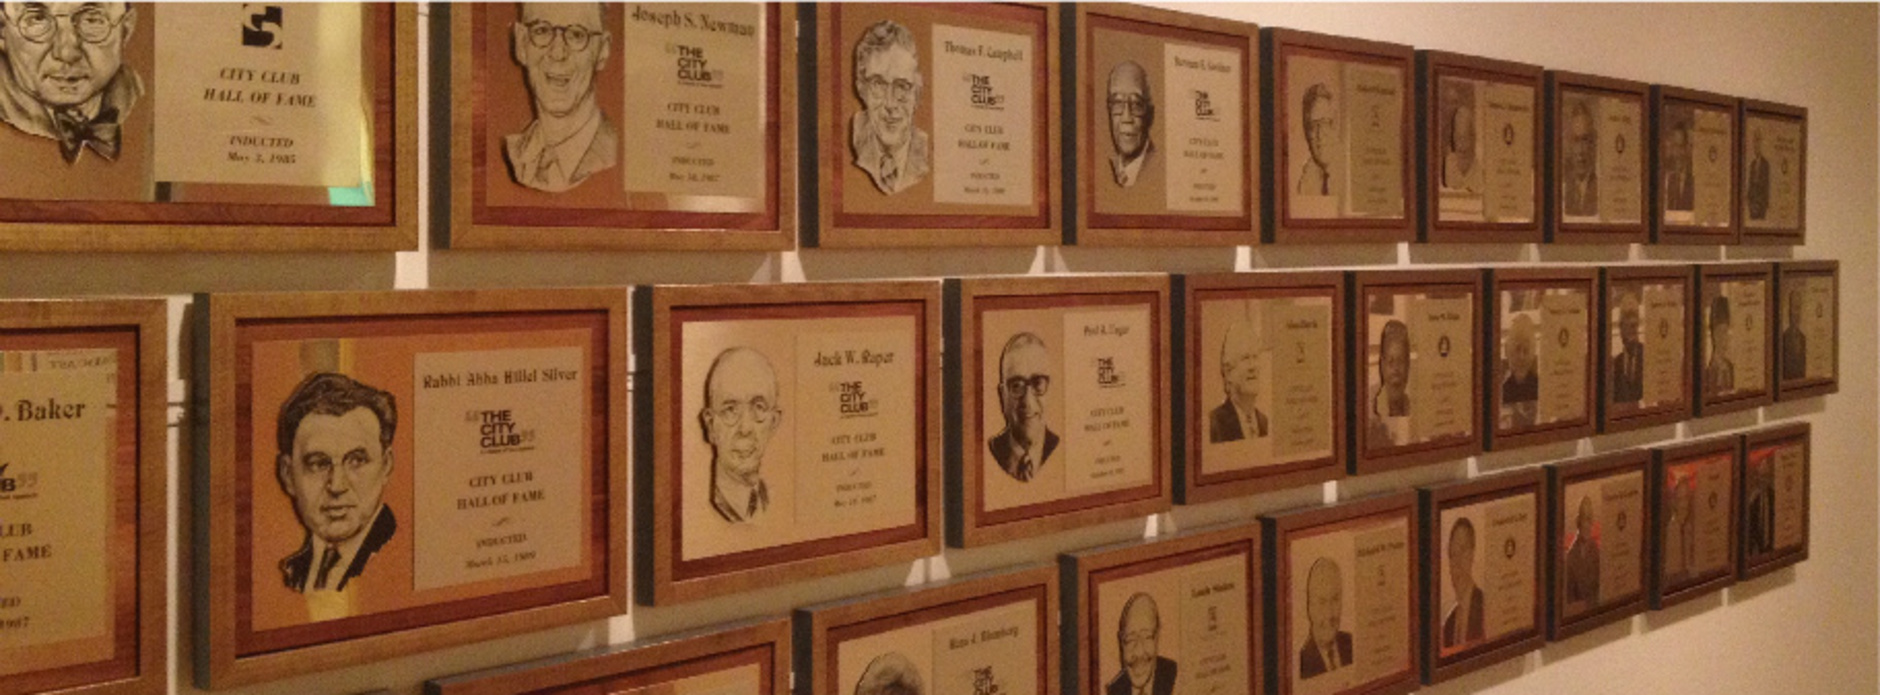 Honoring the 2015 Hall of Fame Inductees